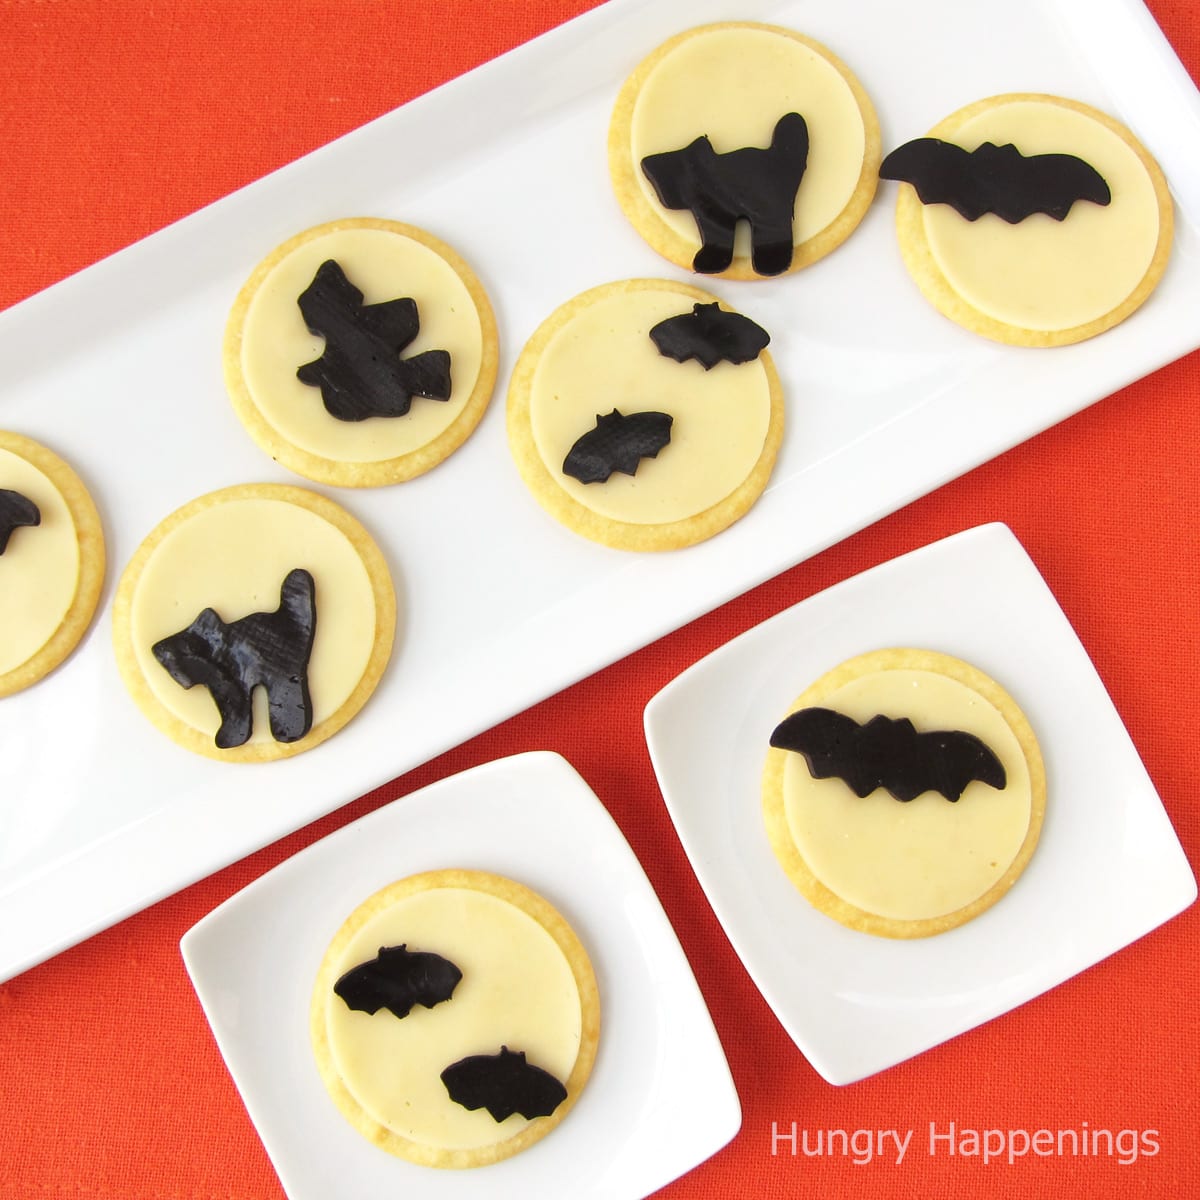 crackers topped with white cheese moons and black cheese bats, cats, and witches.